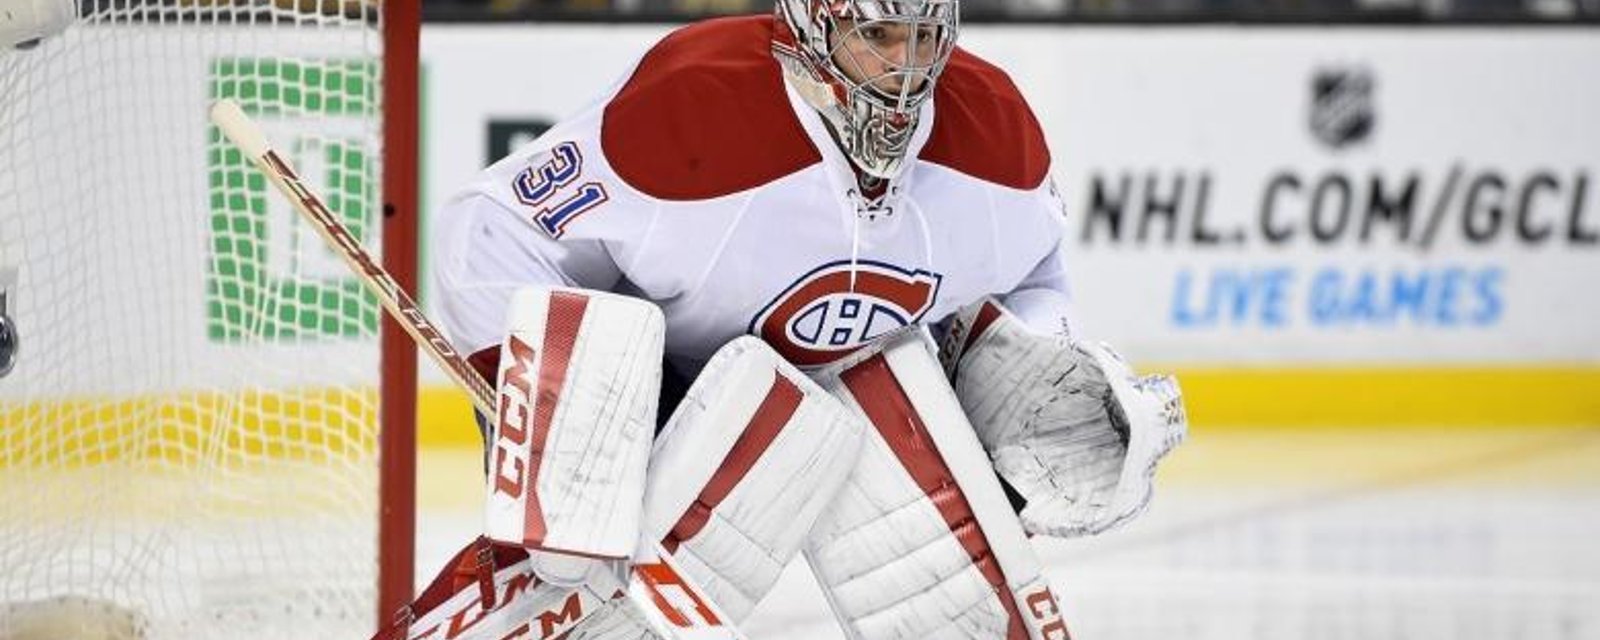 Carey Price makes a strong statement about Shea Weber joining his team.